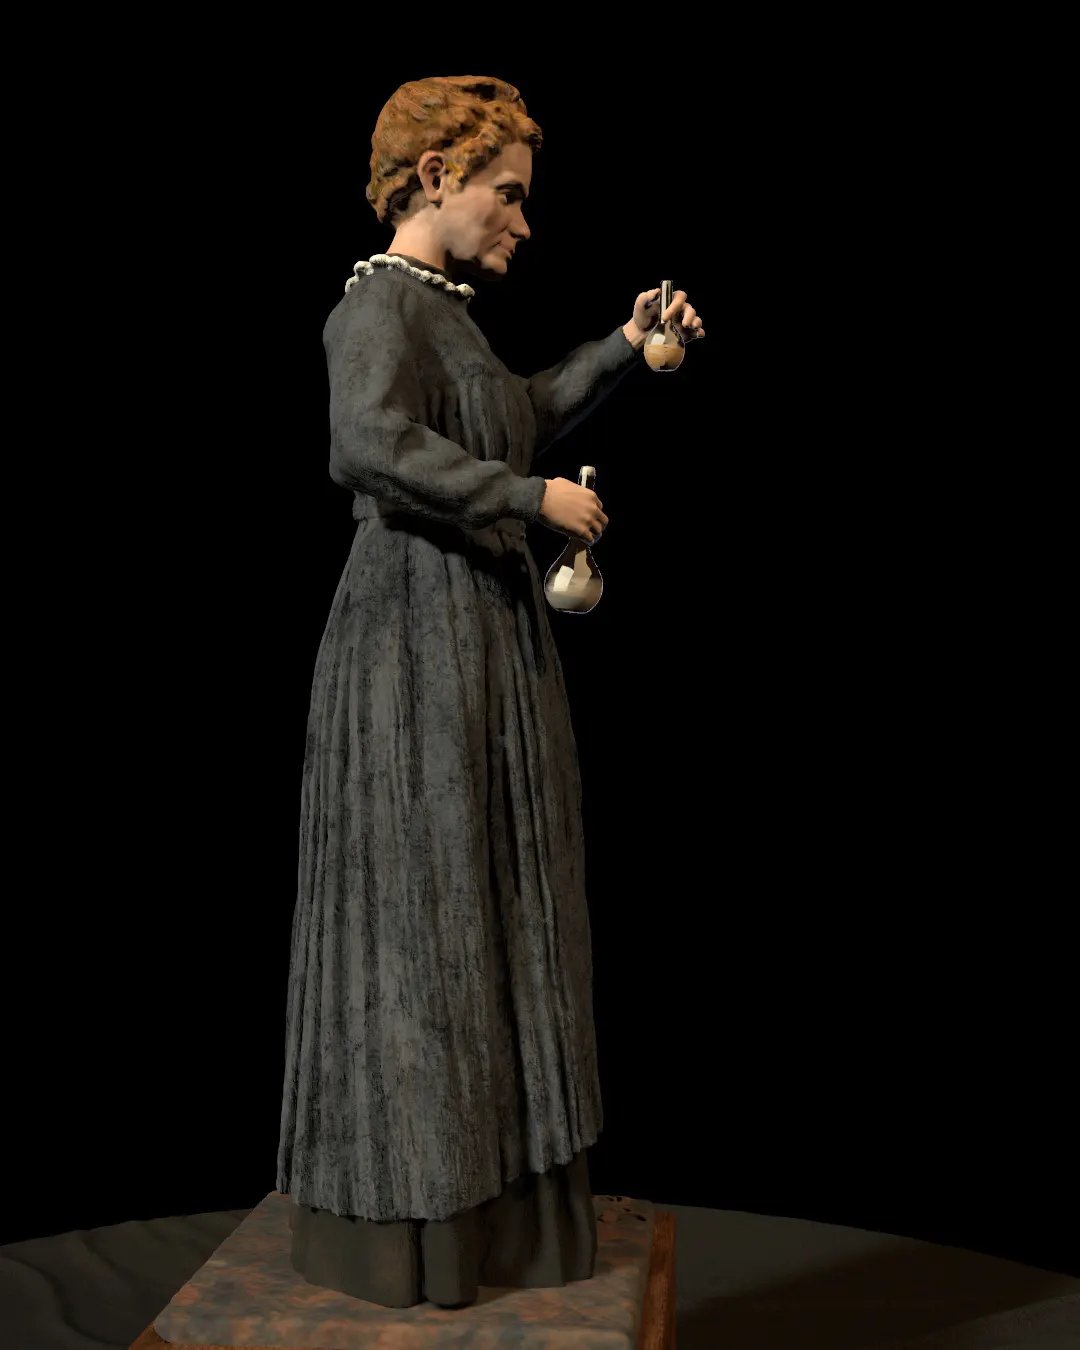 Marie-Curie-statue/Rendering-of-Marie-Curie-statue-modeled-by-Emil-Sole-3.webp